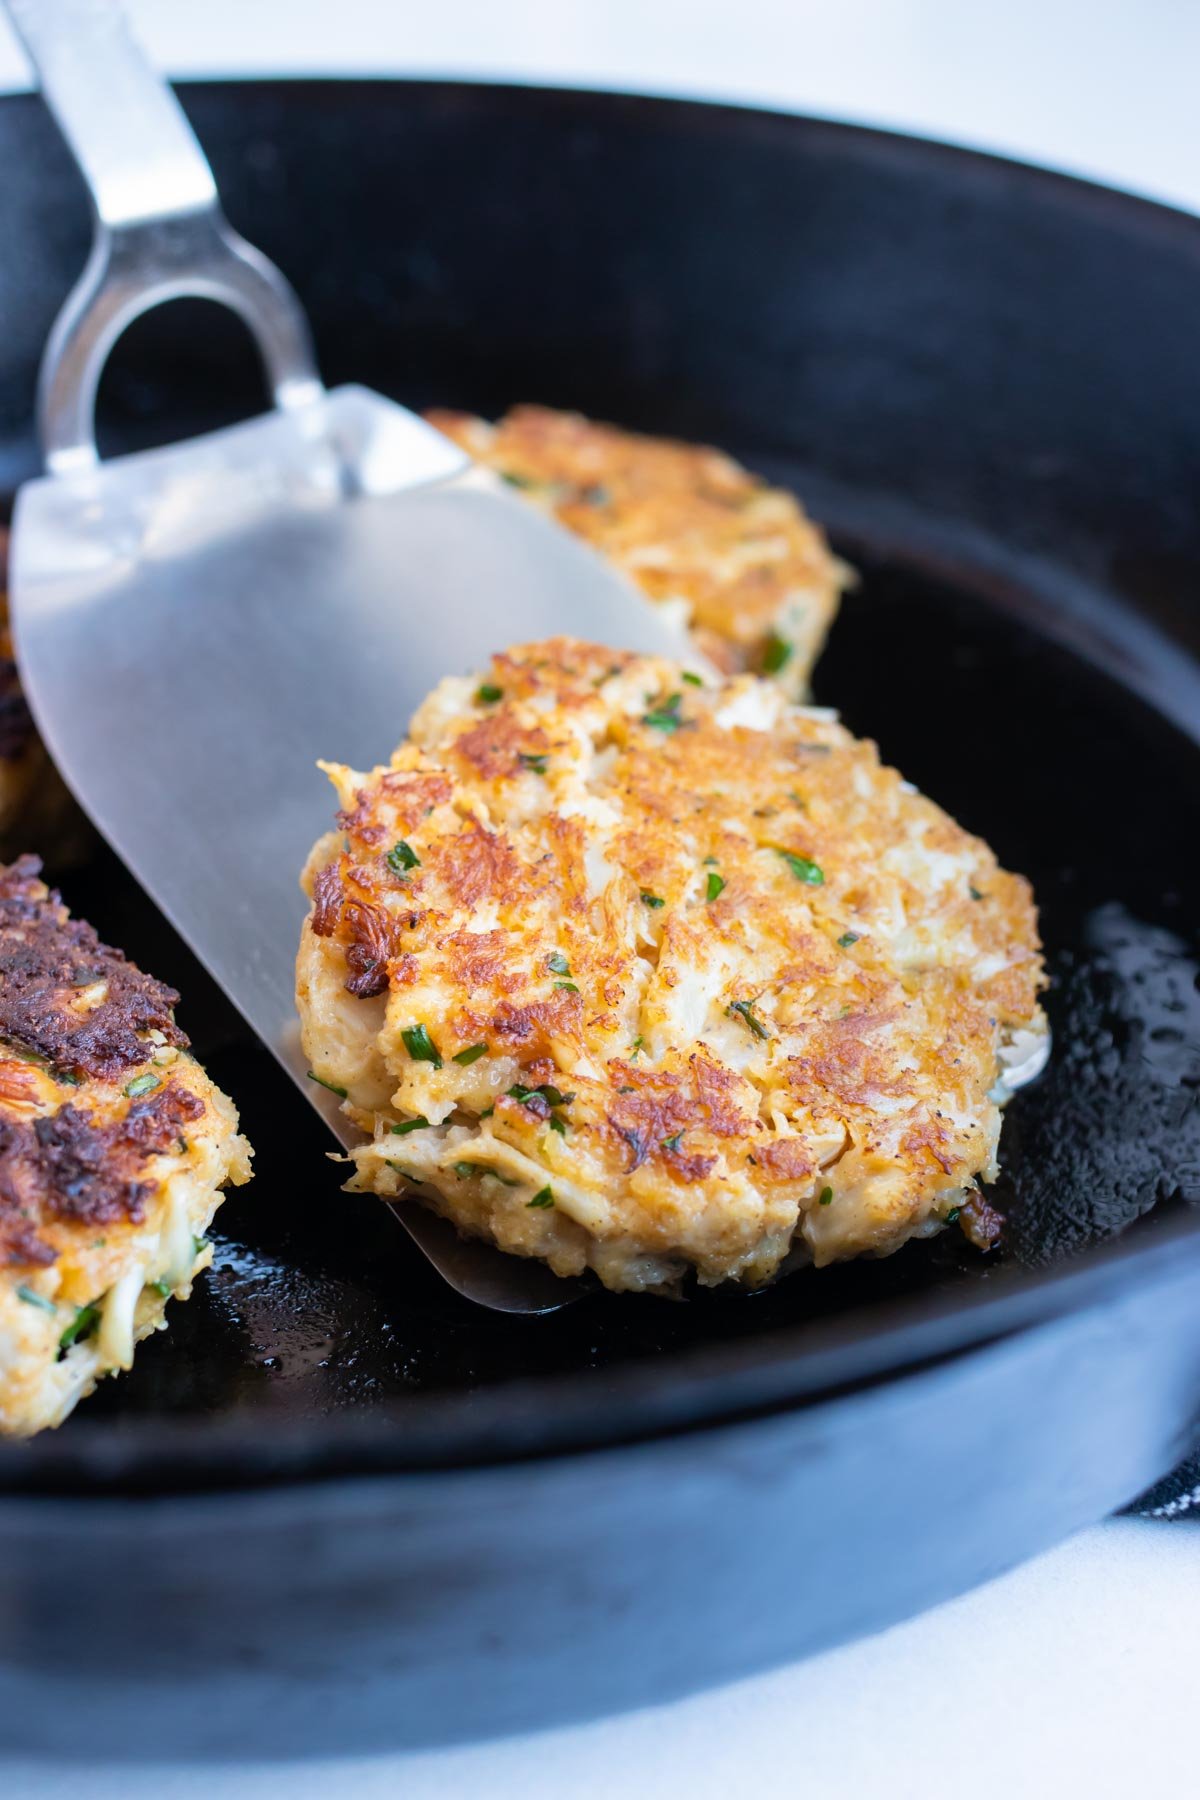 Maryland crab cakes are cooked in a skillet on the stove.